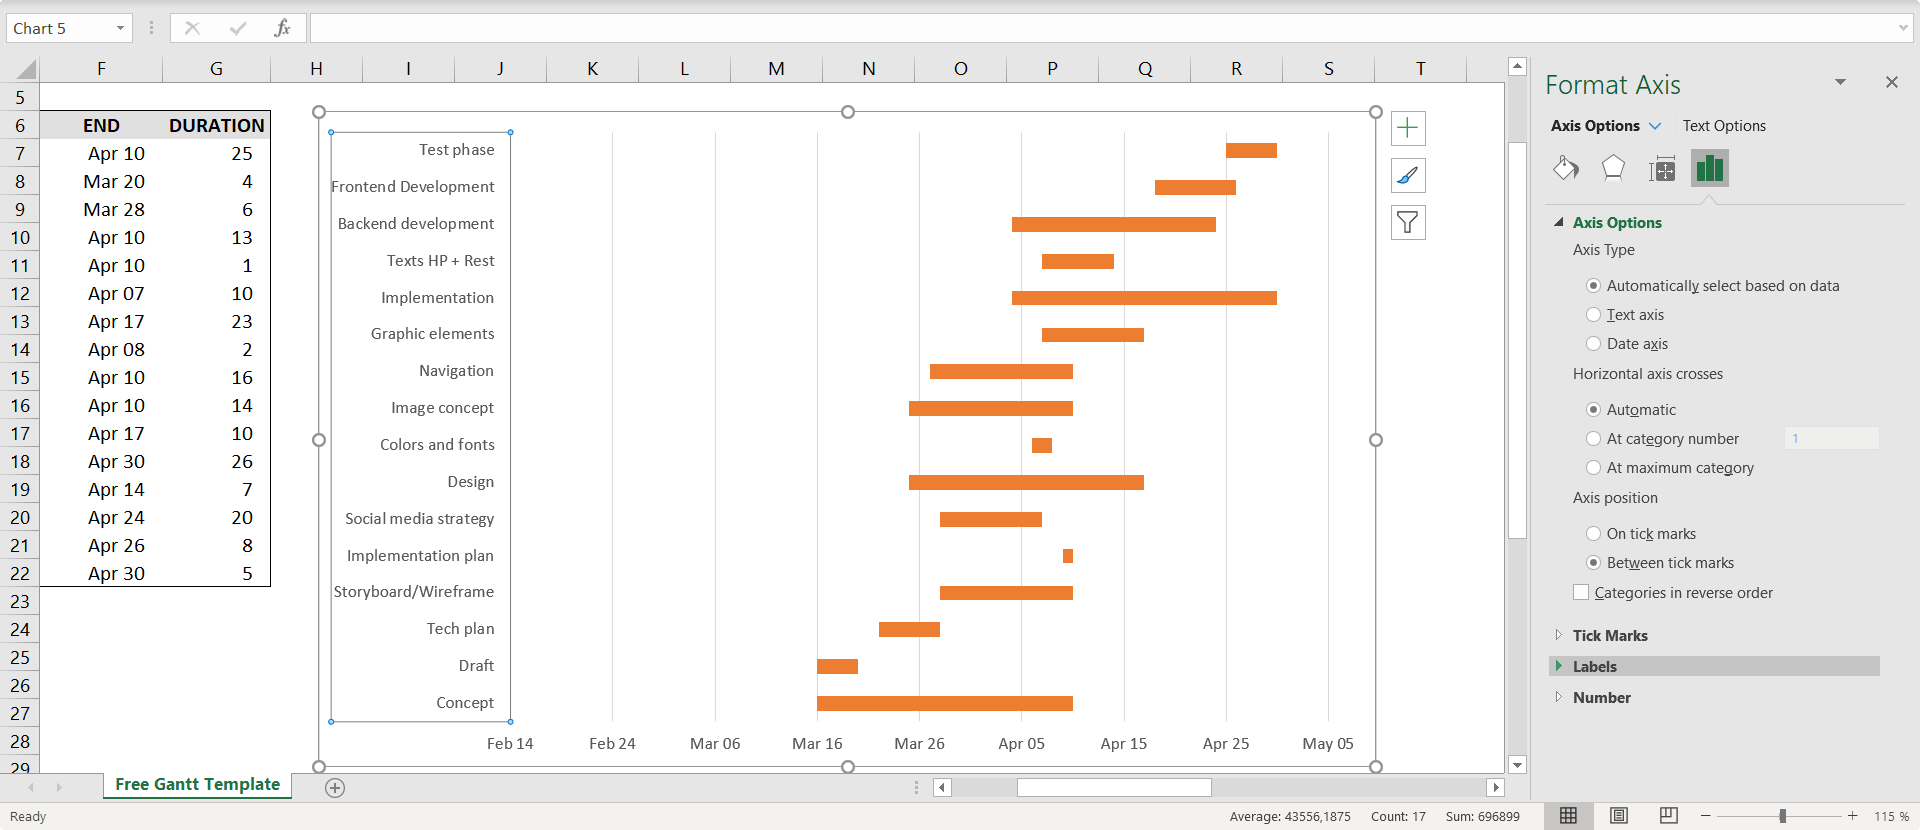 How to reverse the y-axis label in a stacked bar chart in Excel